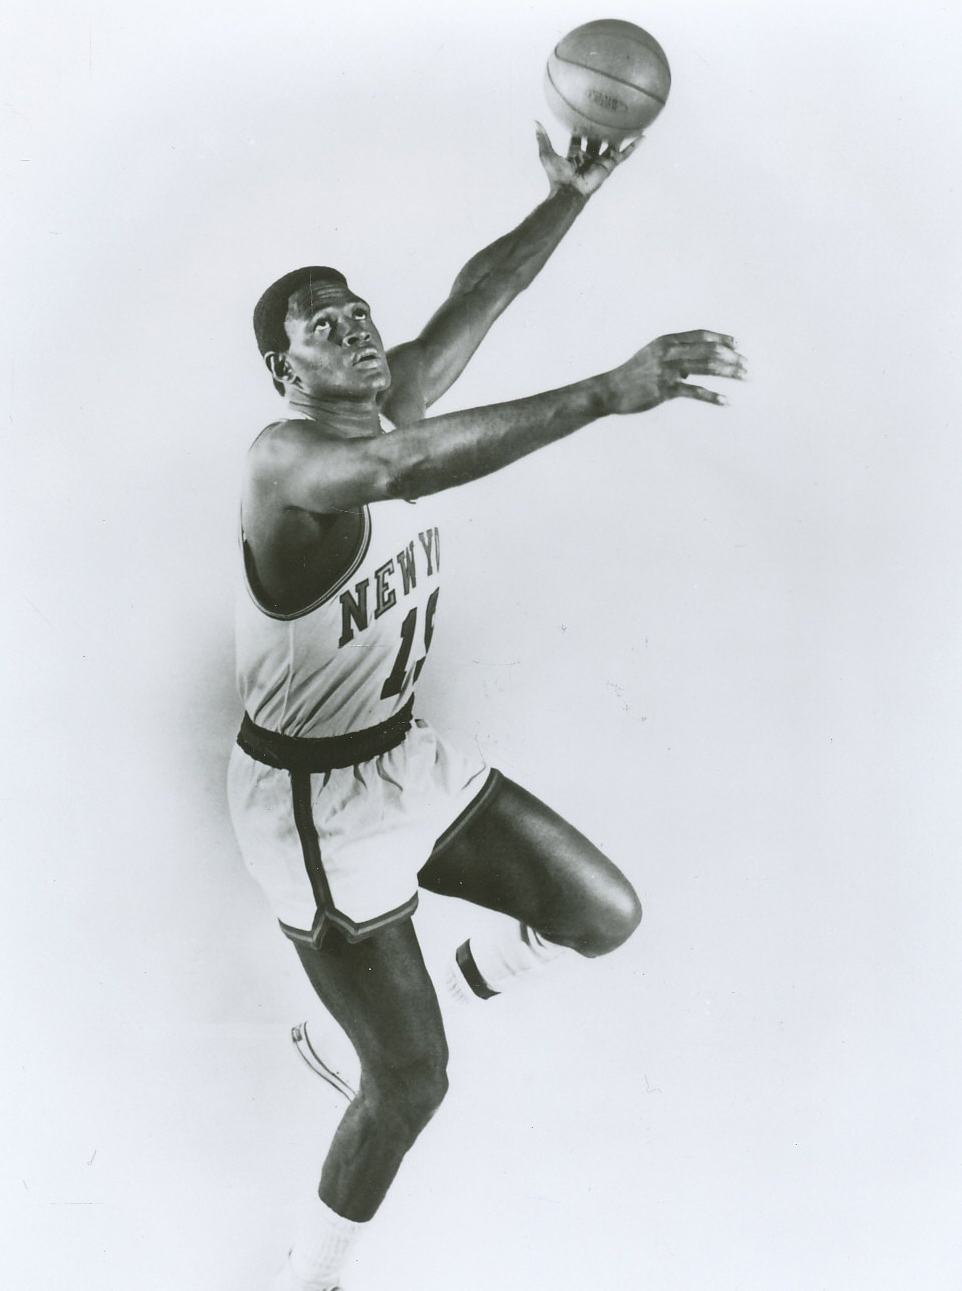 7 Awesome Willis Reed Cards to Honor the Legend